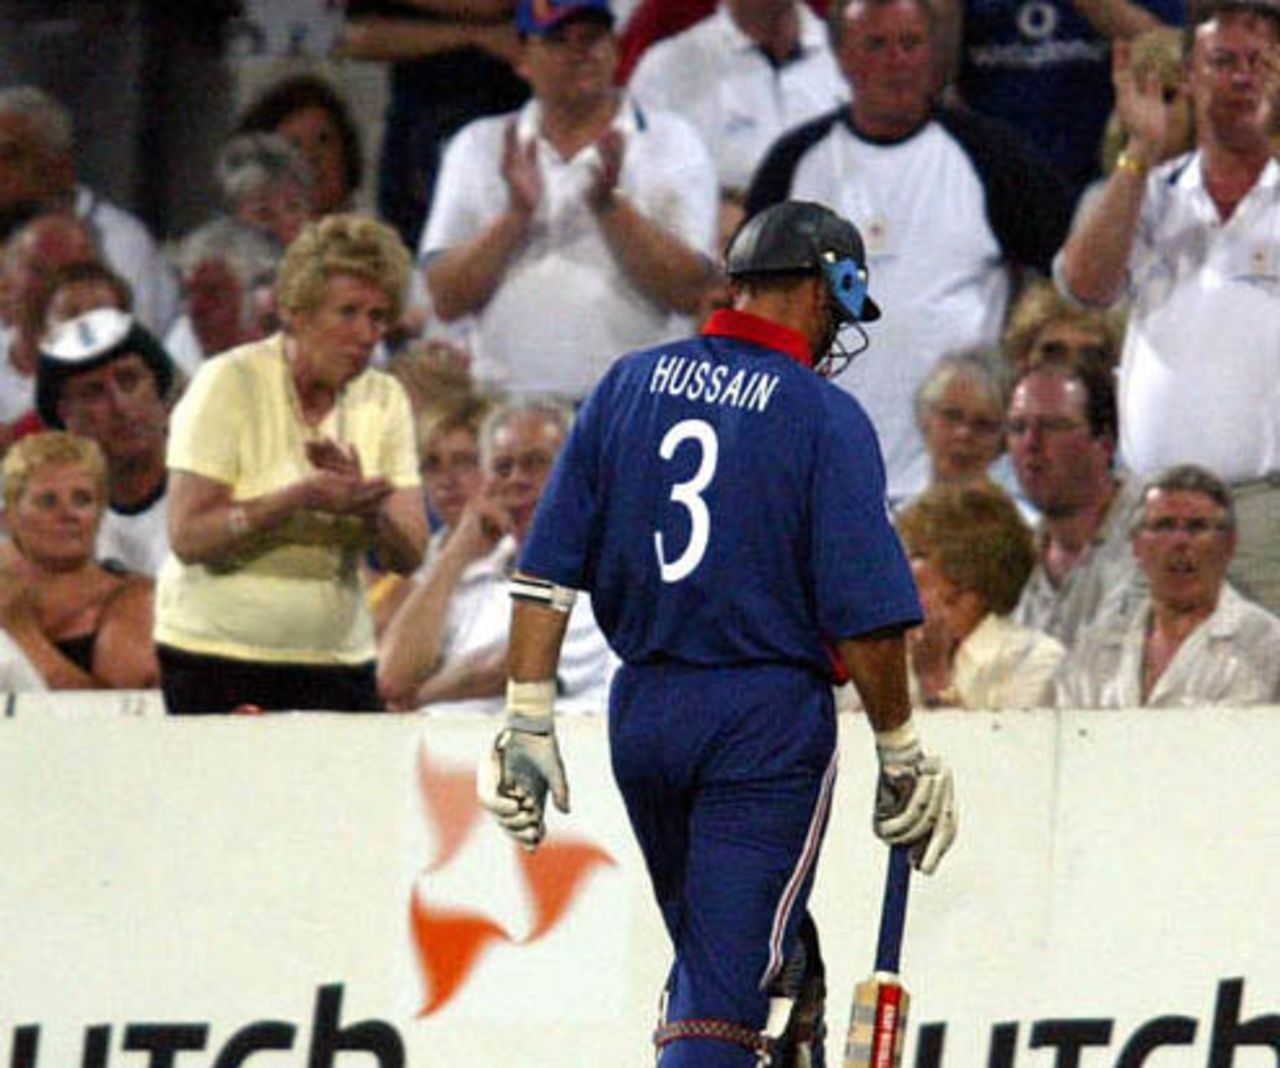 World Cup, 2003 - England v India at Durban, 26th February 2003